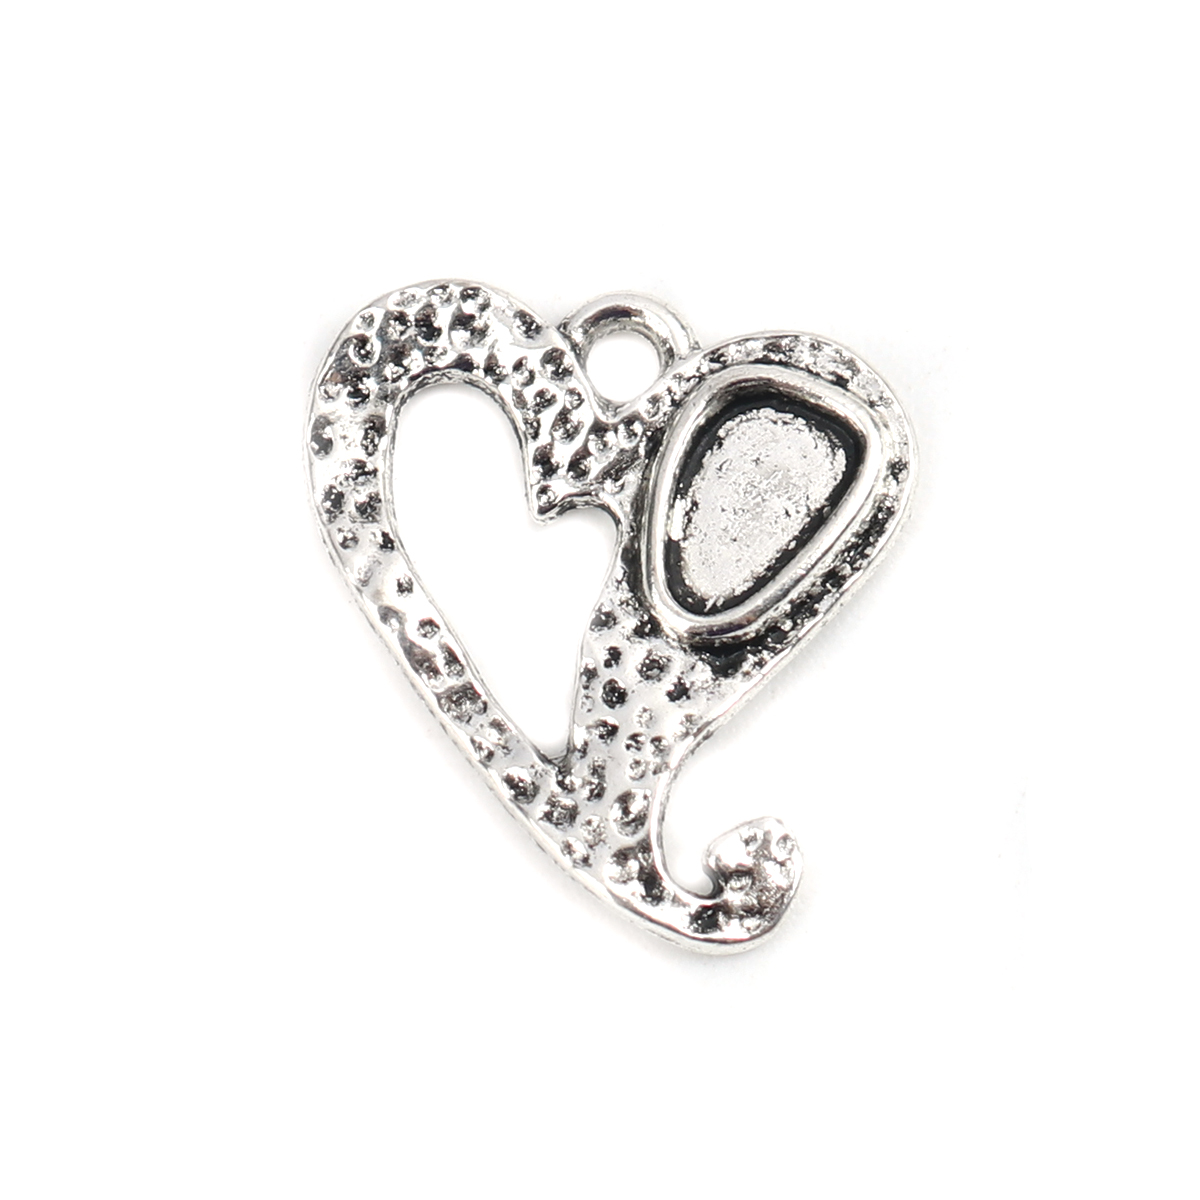 Picture of Zinc Based Alloy Hammered Cabochon Settings Charms Heart Antique Silver (Fits 7mm x 5mm) 19mm x 18mm, 50 PCs